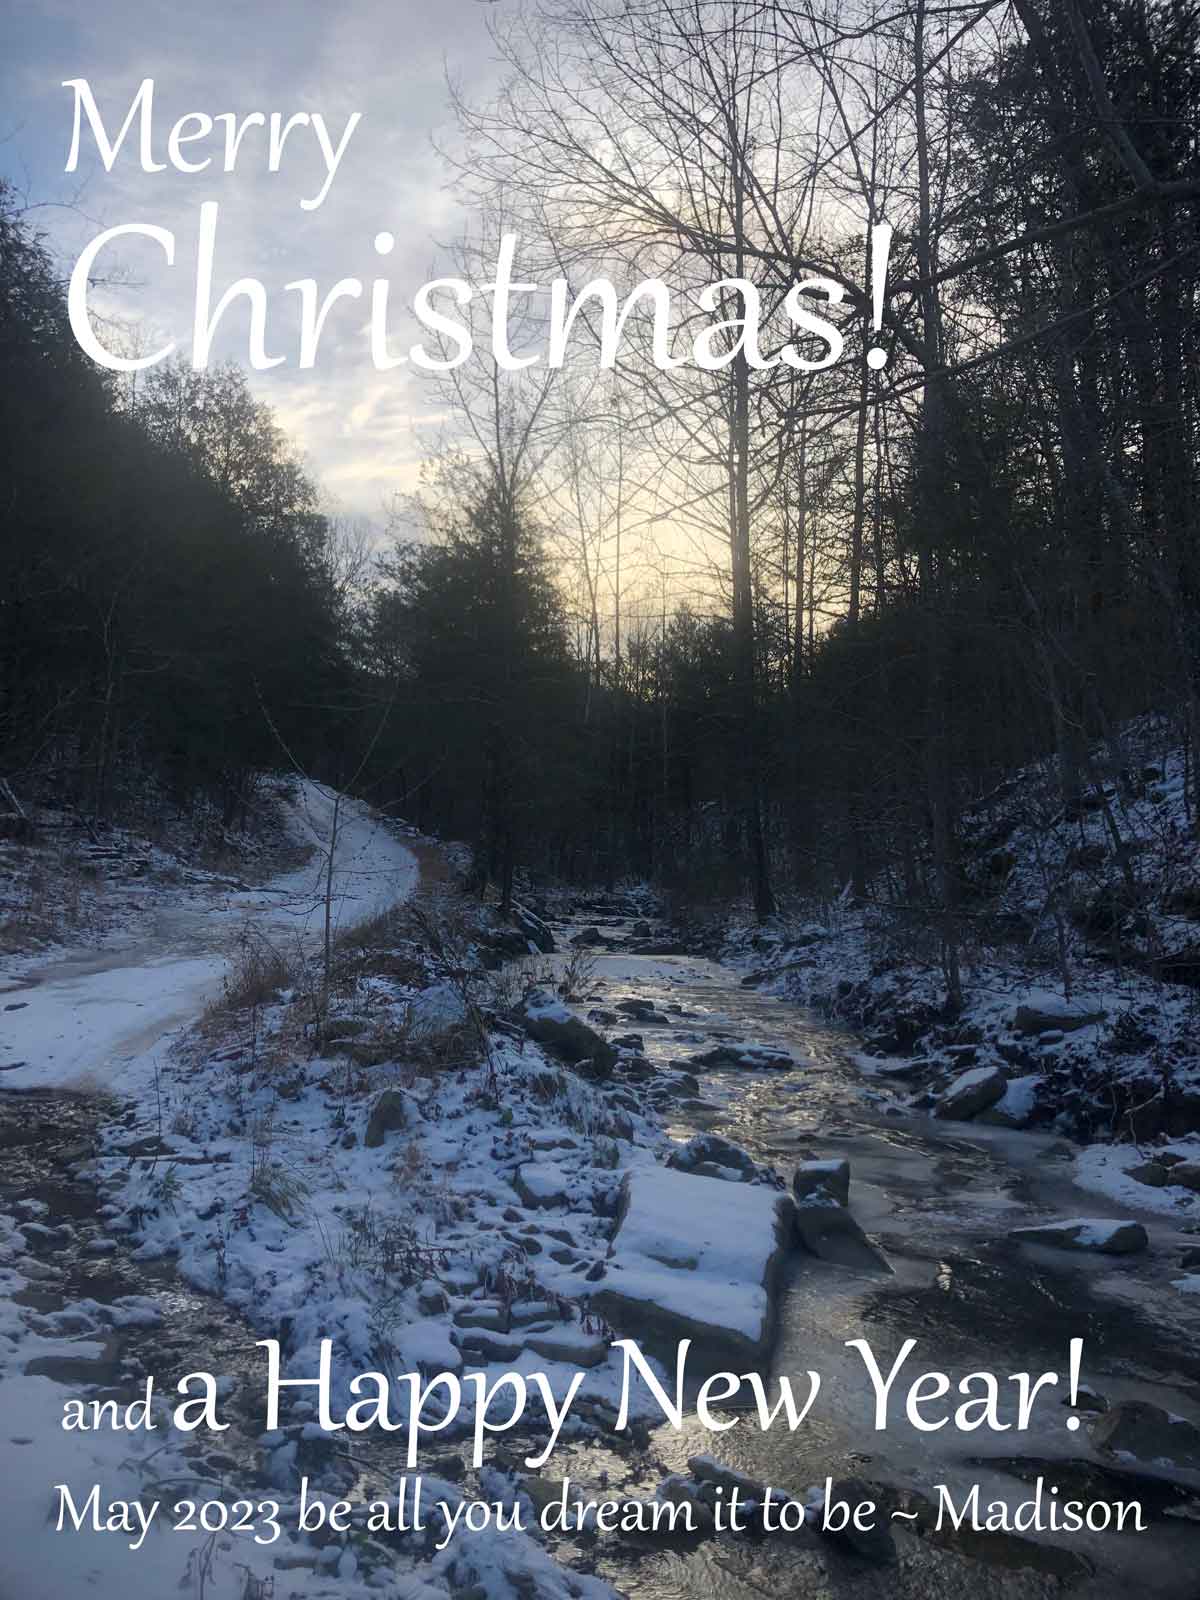 Merry Christmas and Happy New Year from Madison Woods and Wild Ozark.